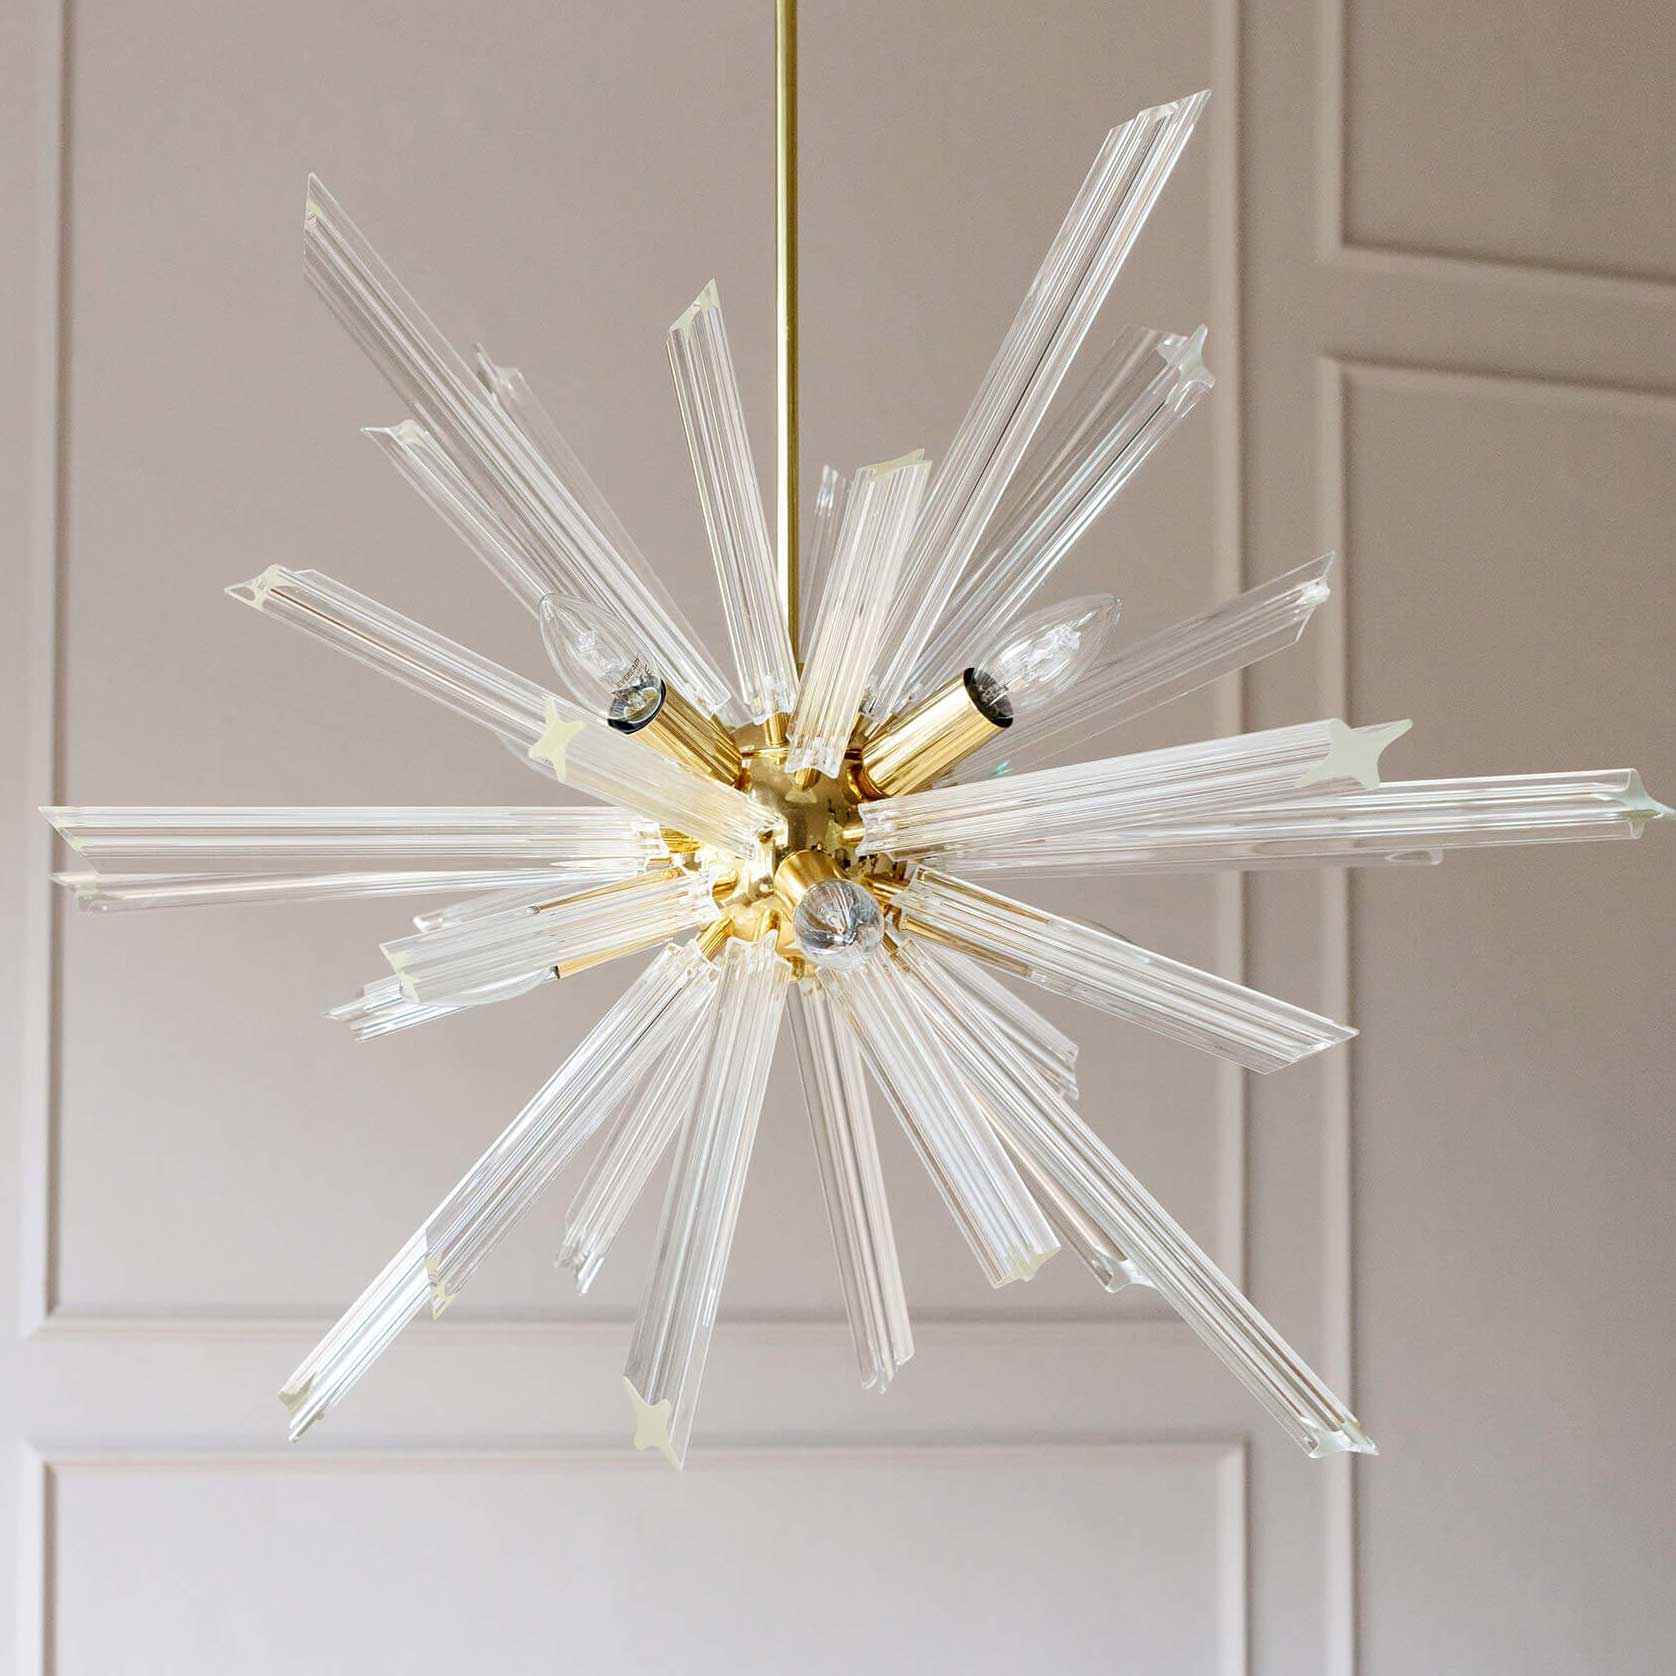 Read more about Graham and green giotto starburst chandelier